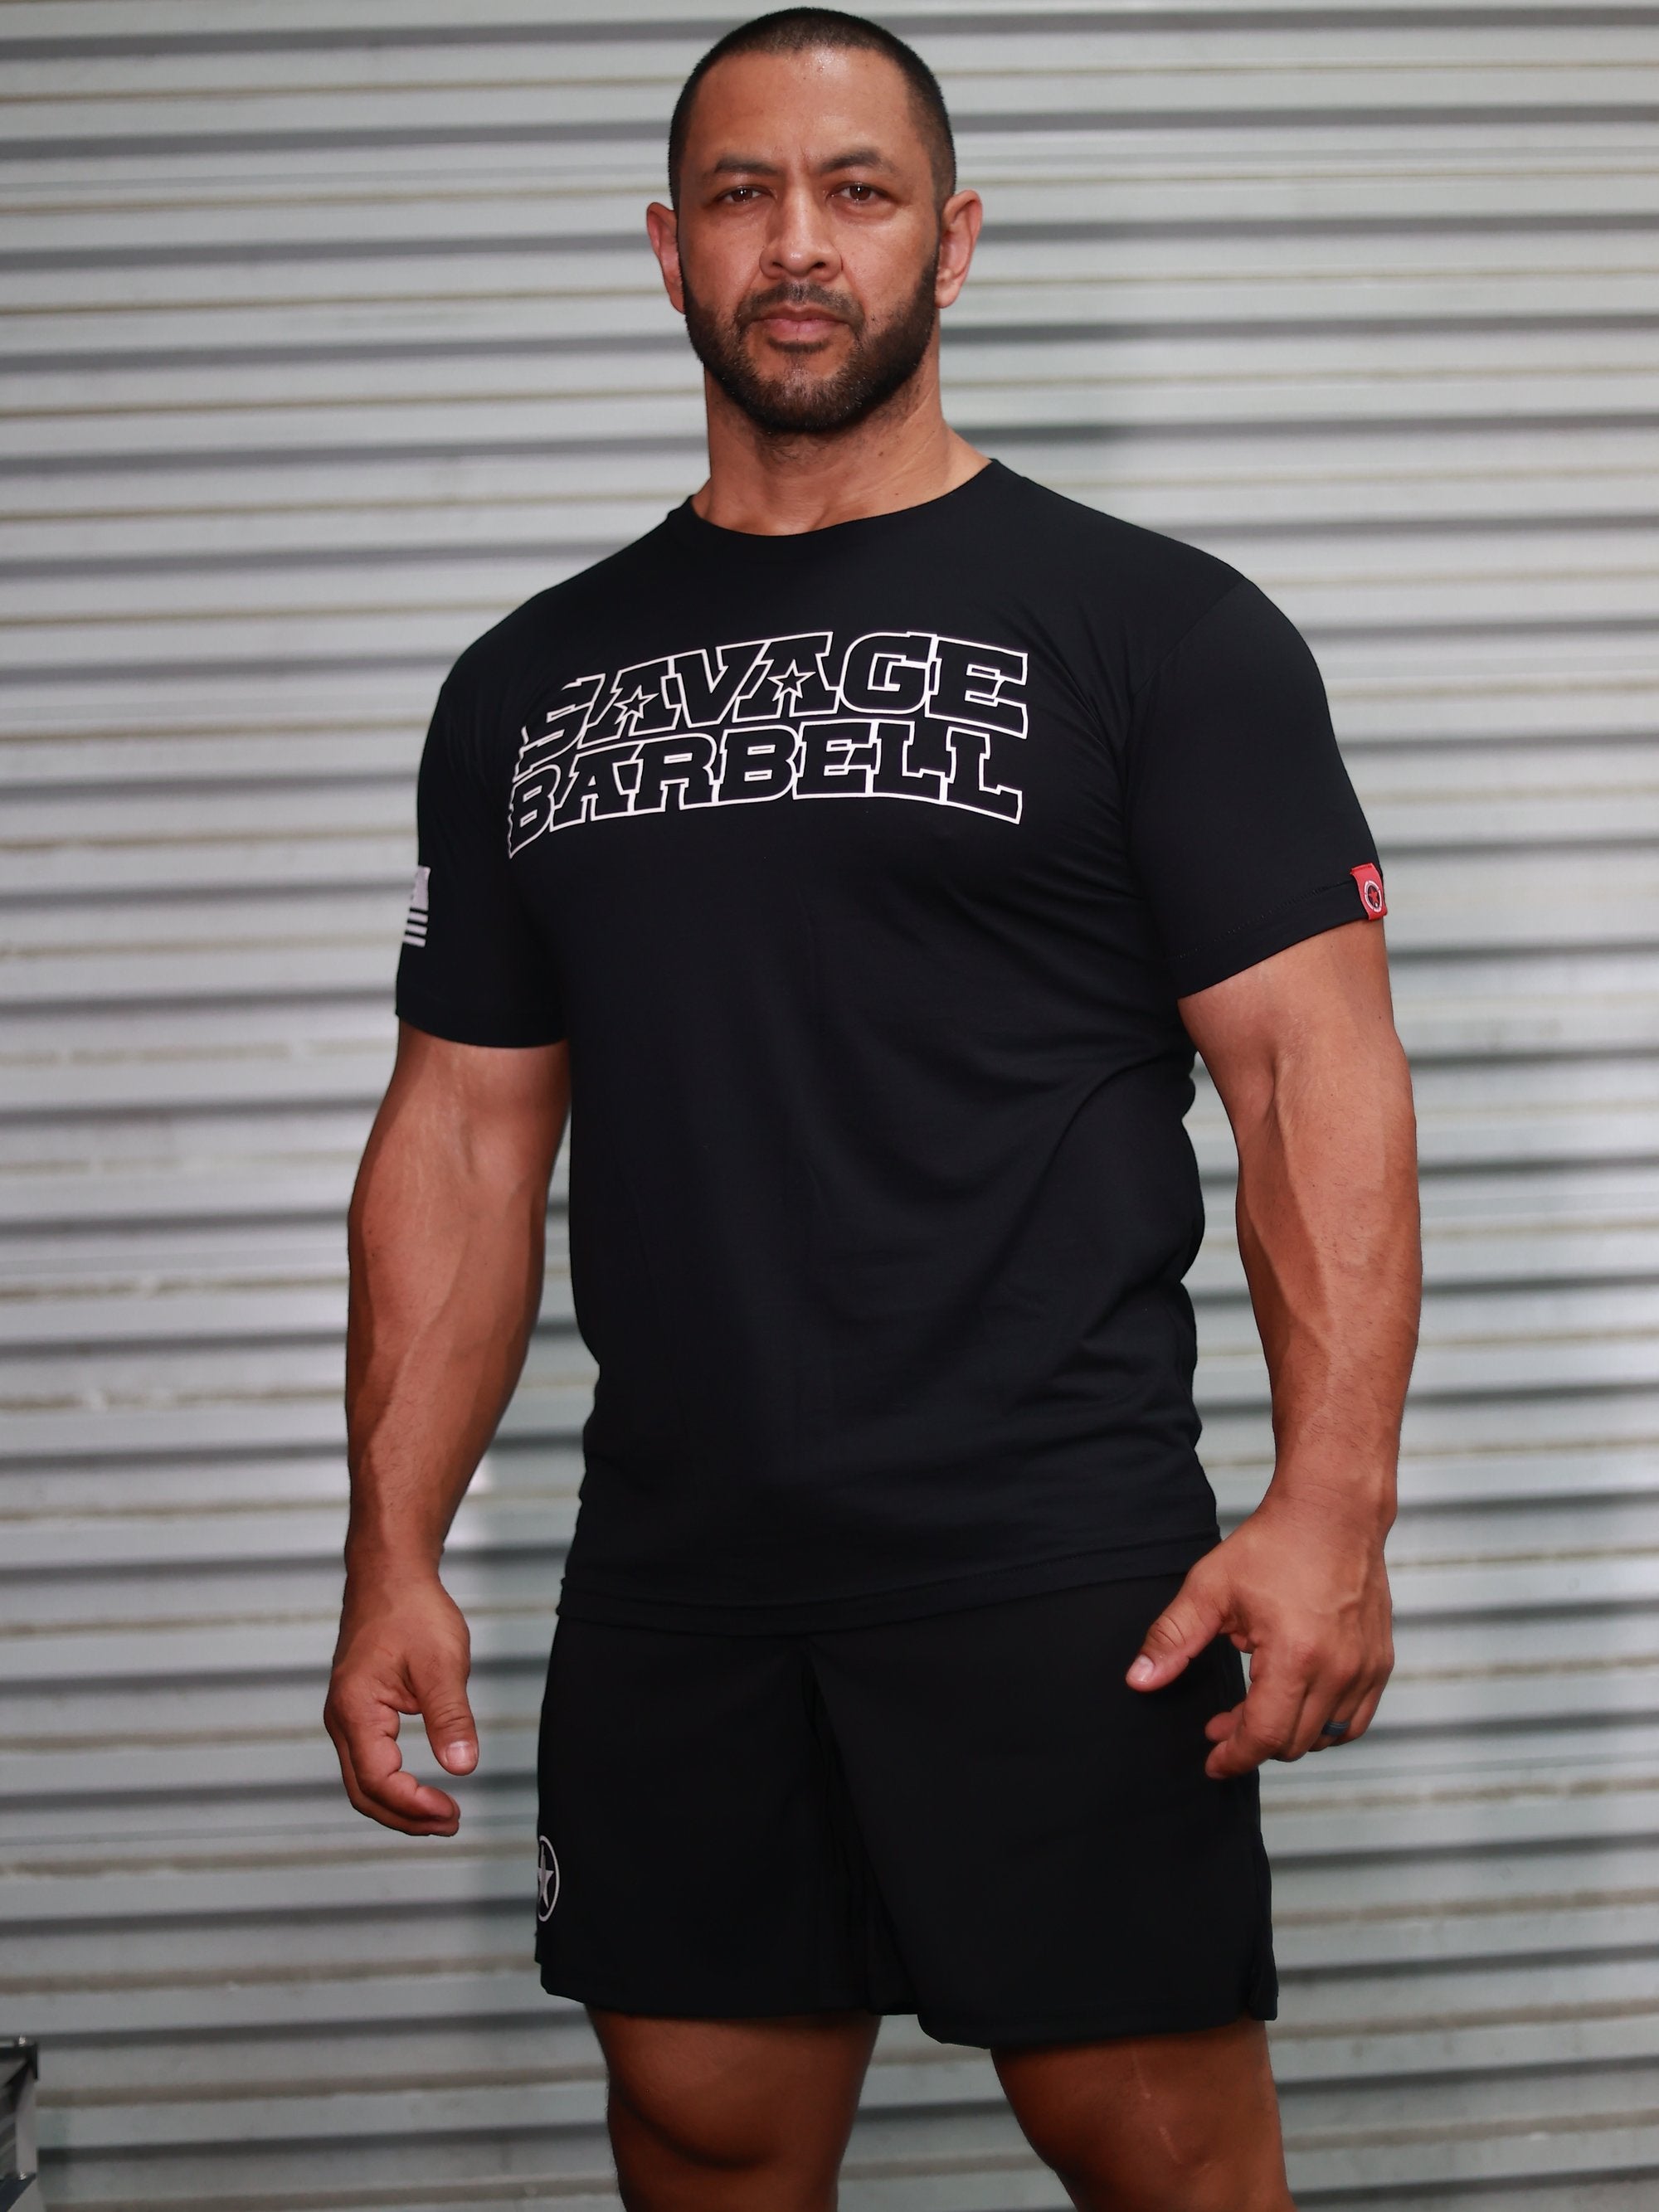 Suicide Squad T-shirt - Men from Savage Barbell for Genejack WOD